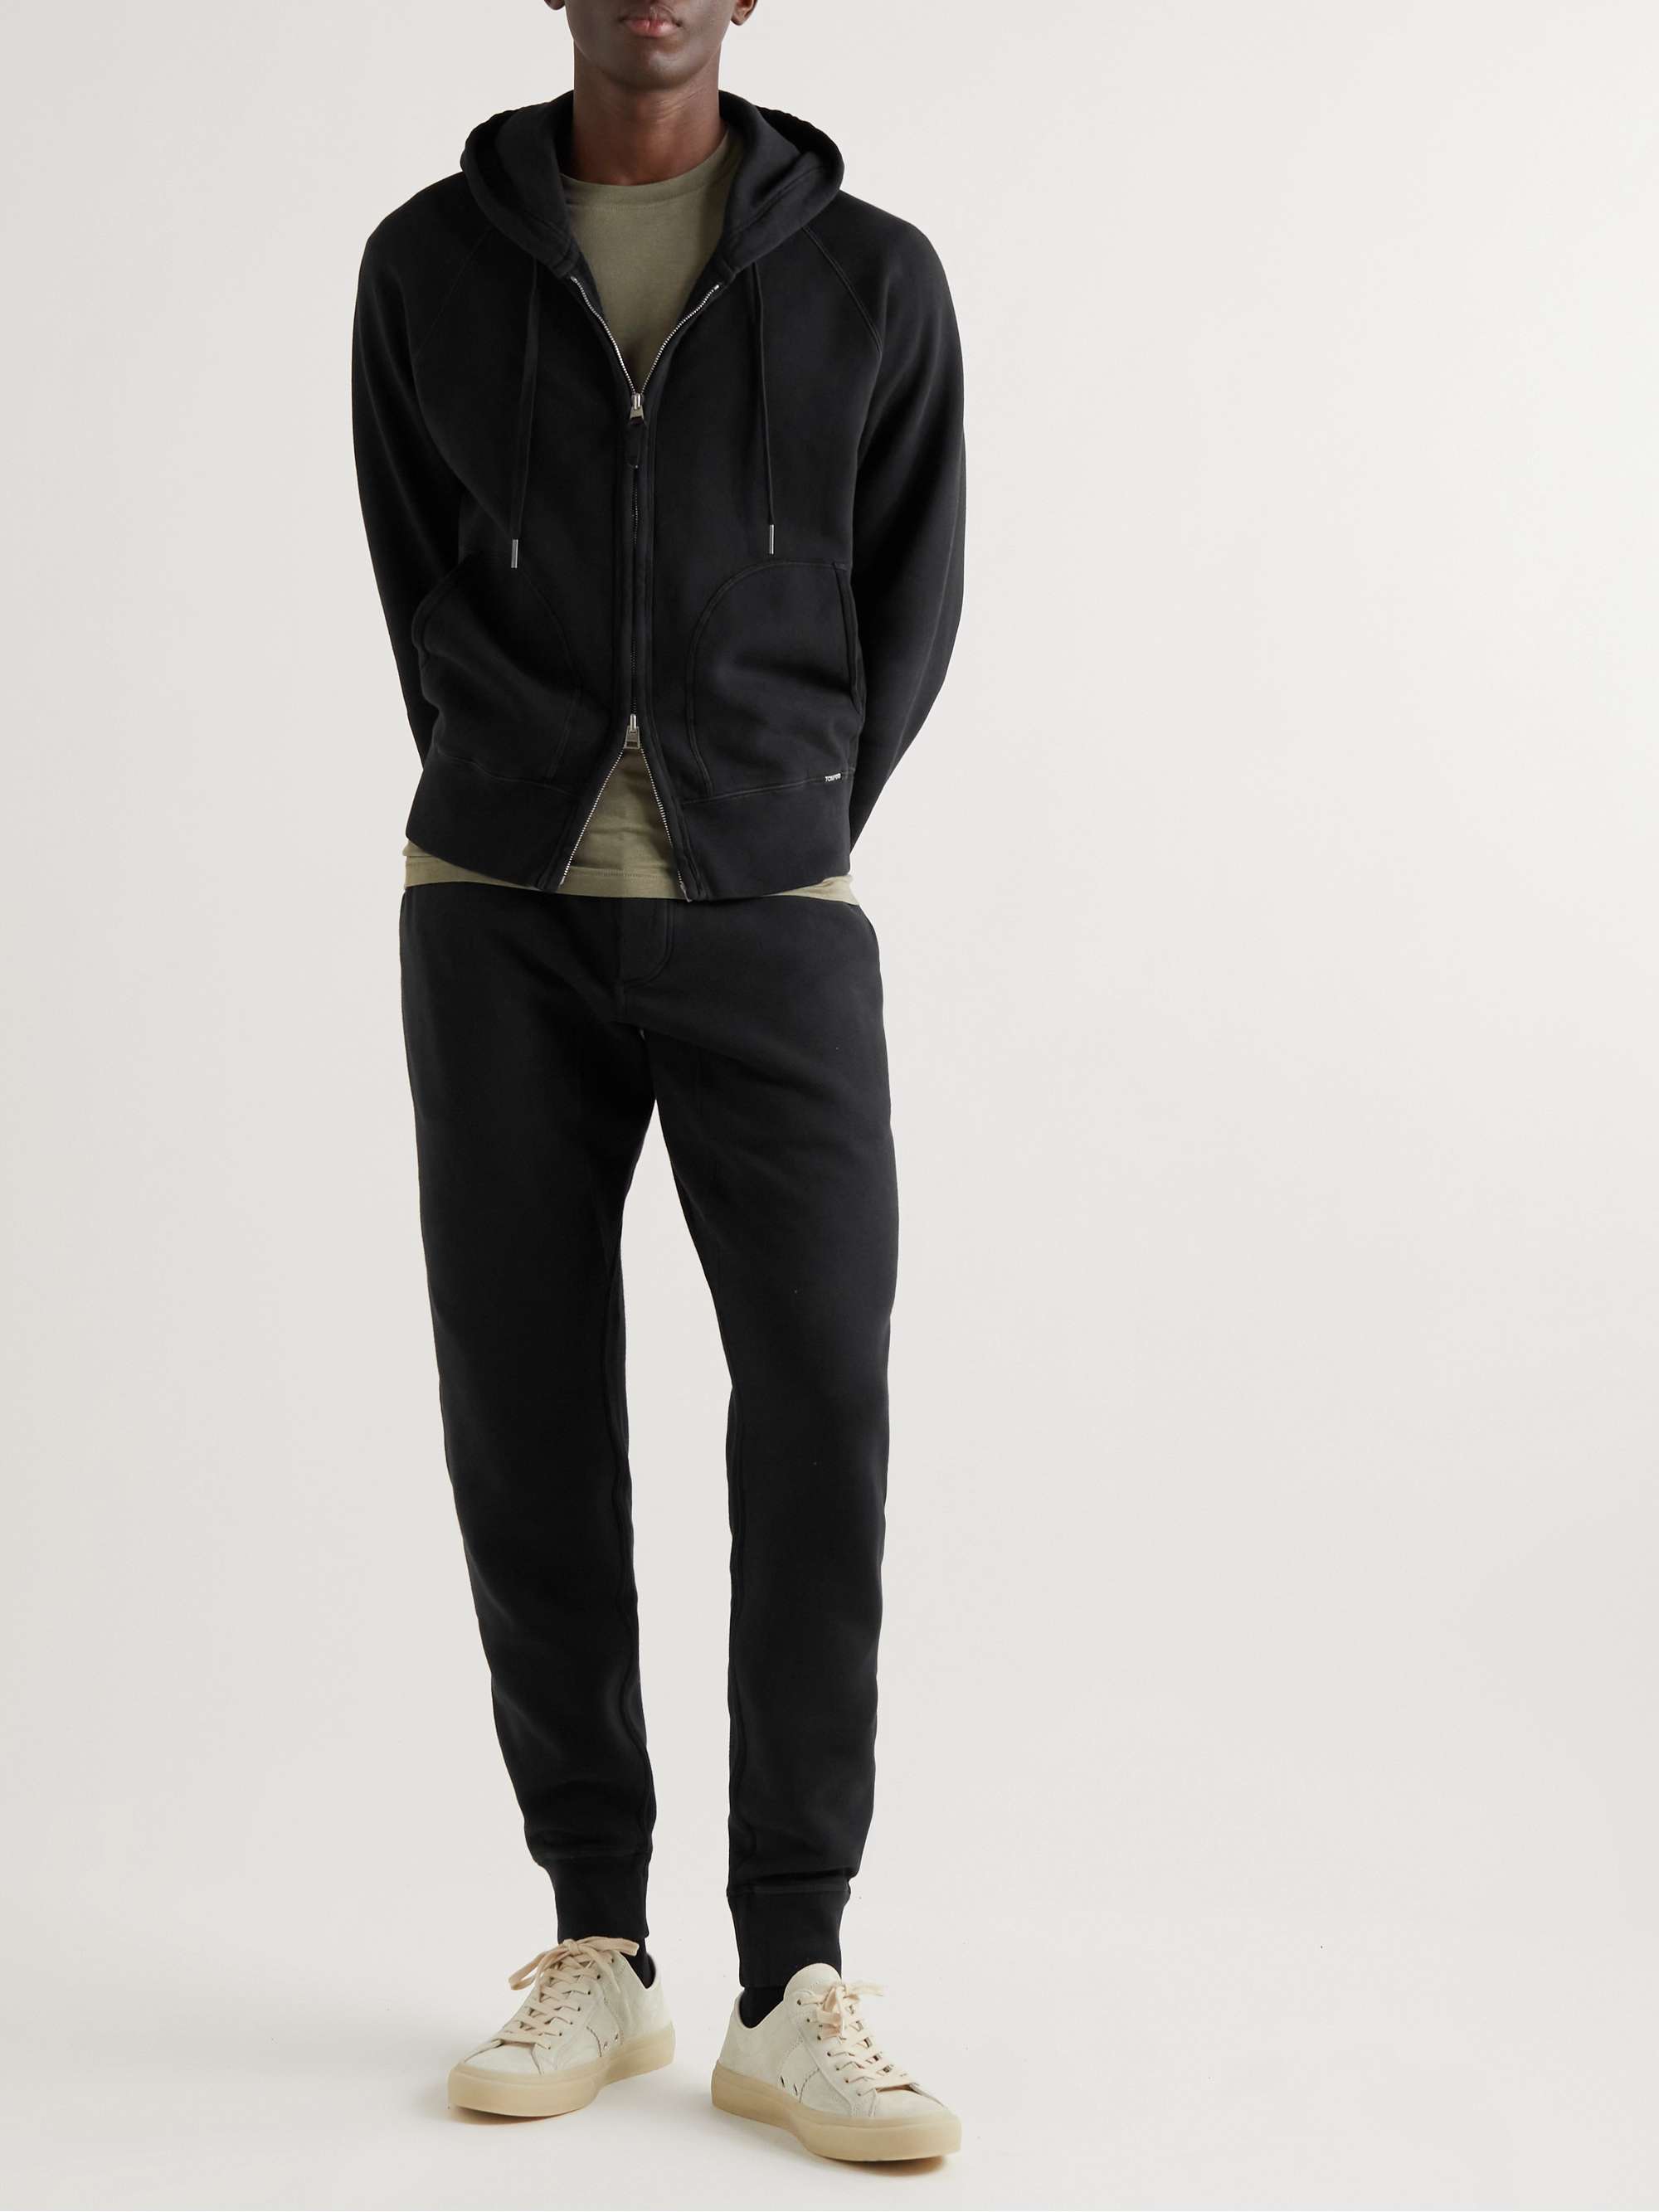 TOM FORD Garment-Dyed Cotton-Jersey Zip-Up Hoodie